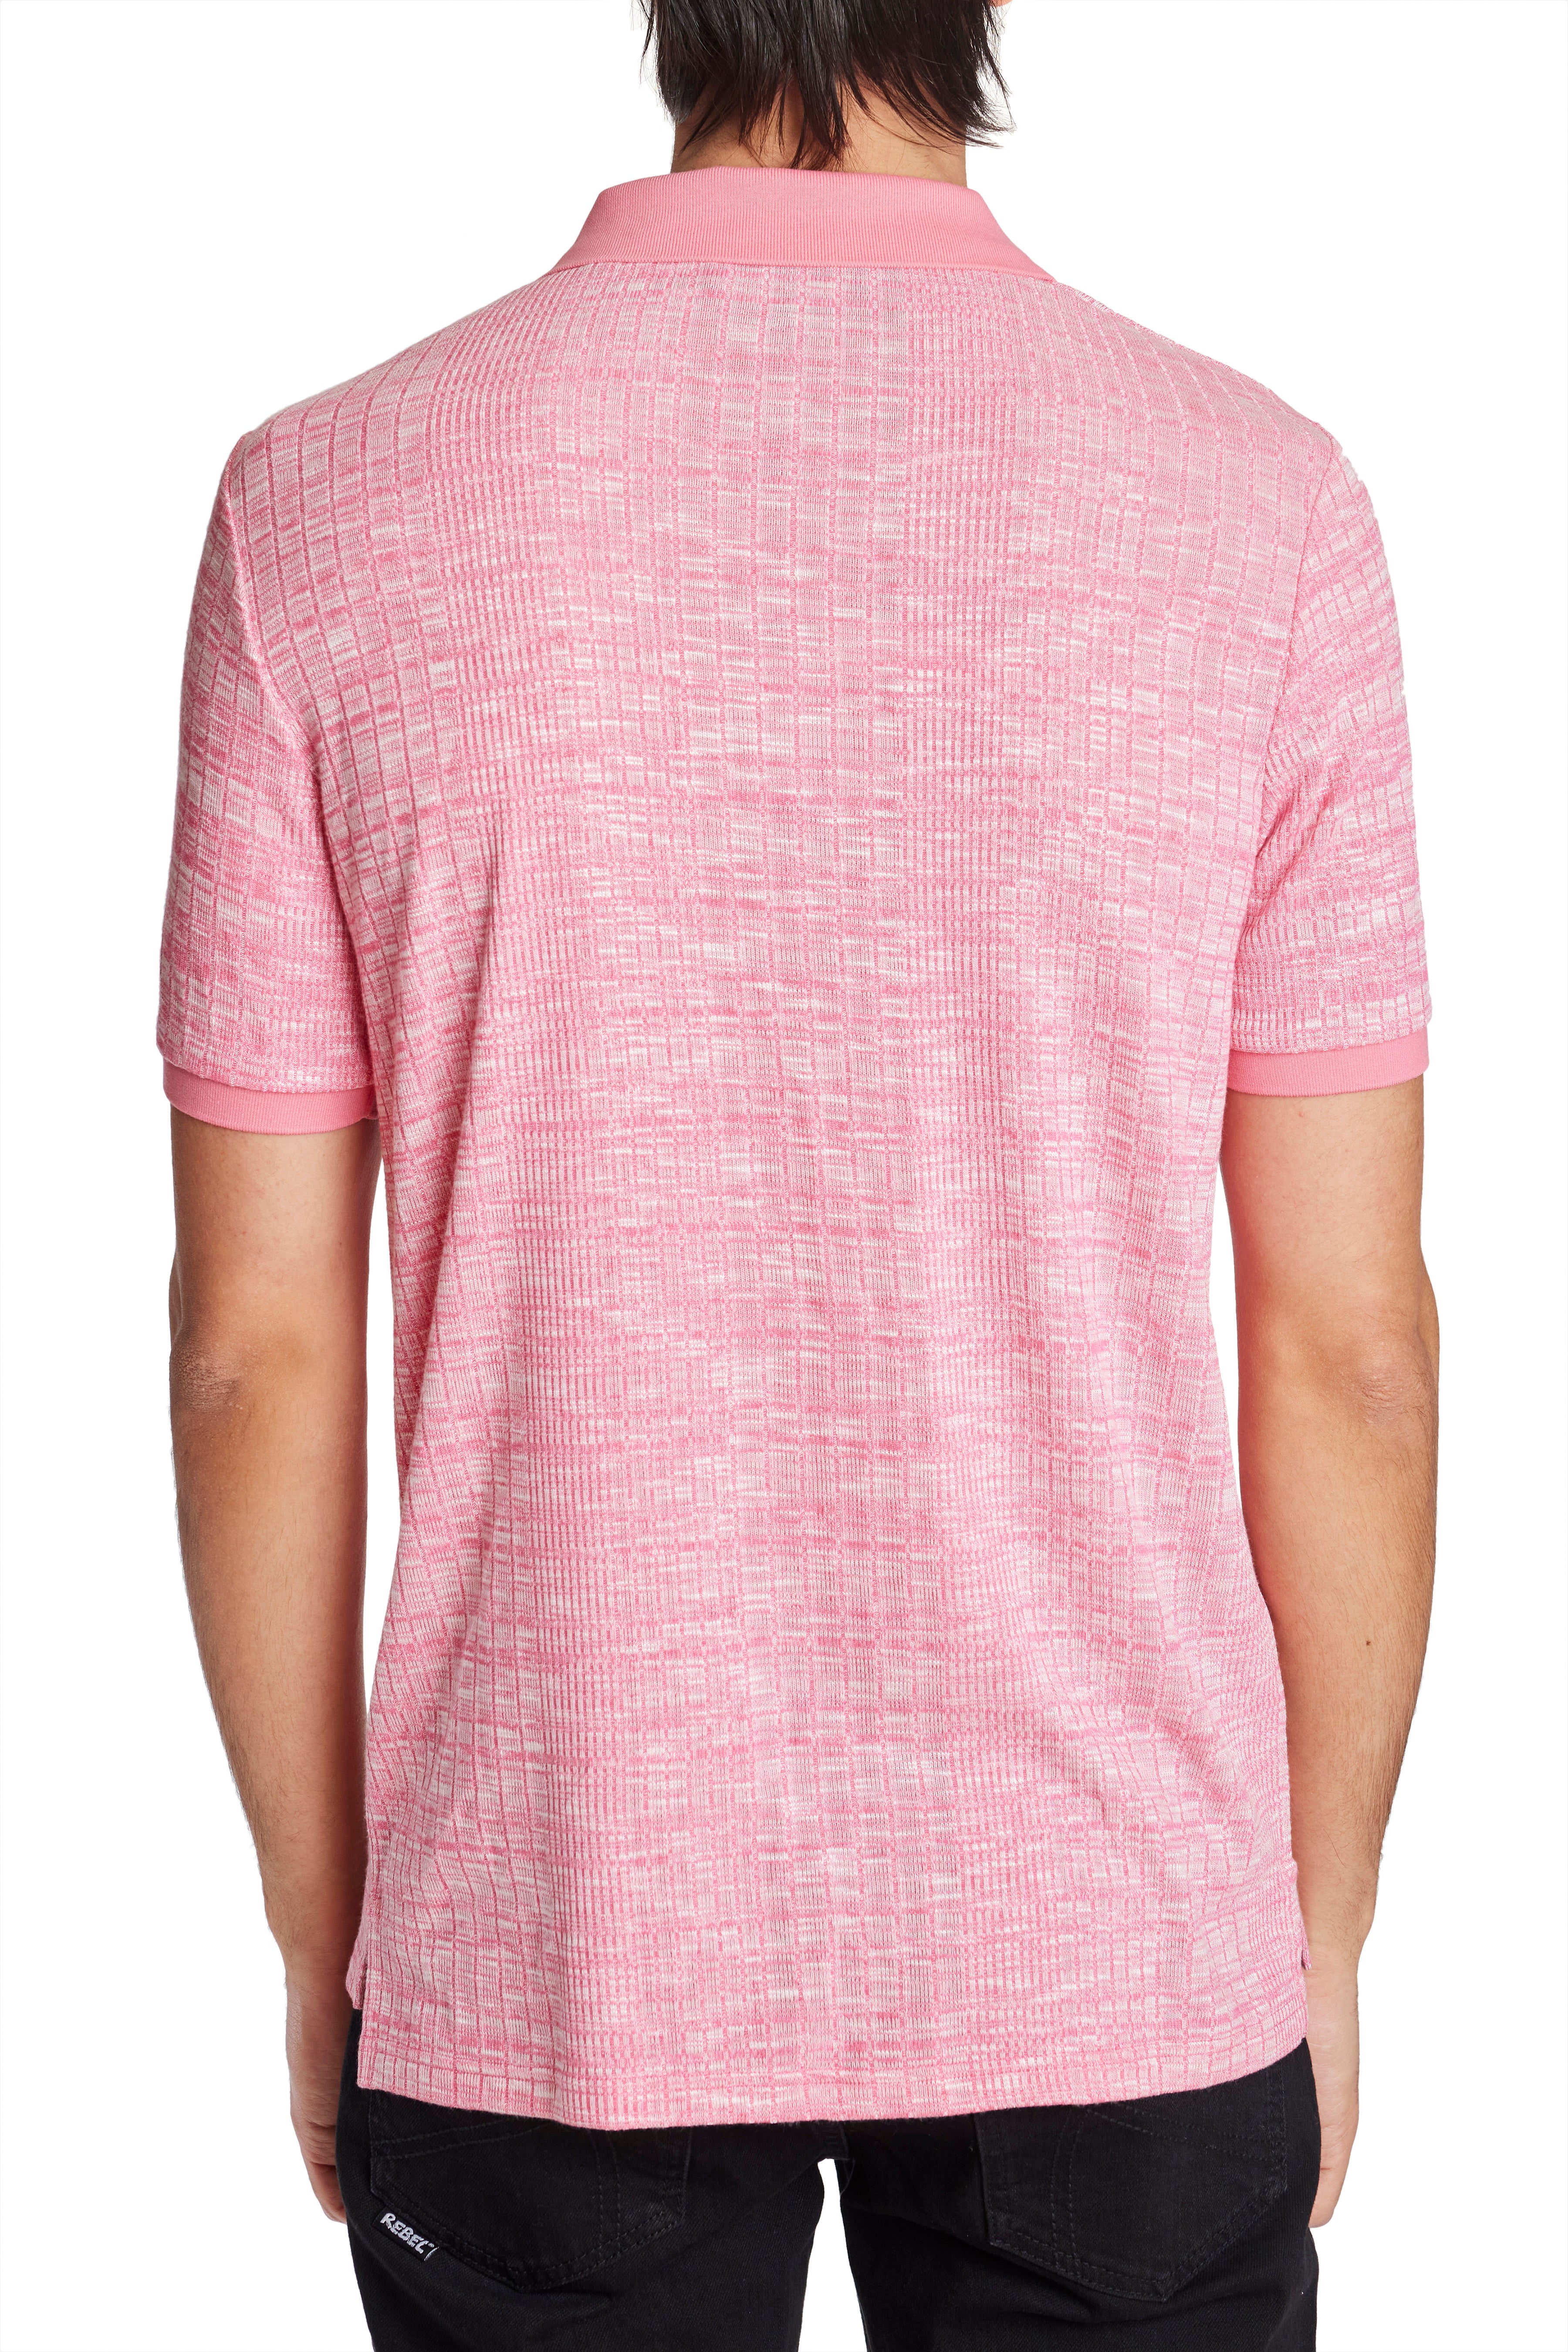 Funday Variegated Polo - Hot Pink